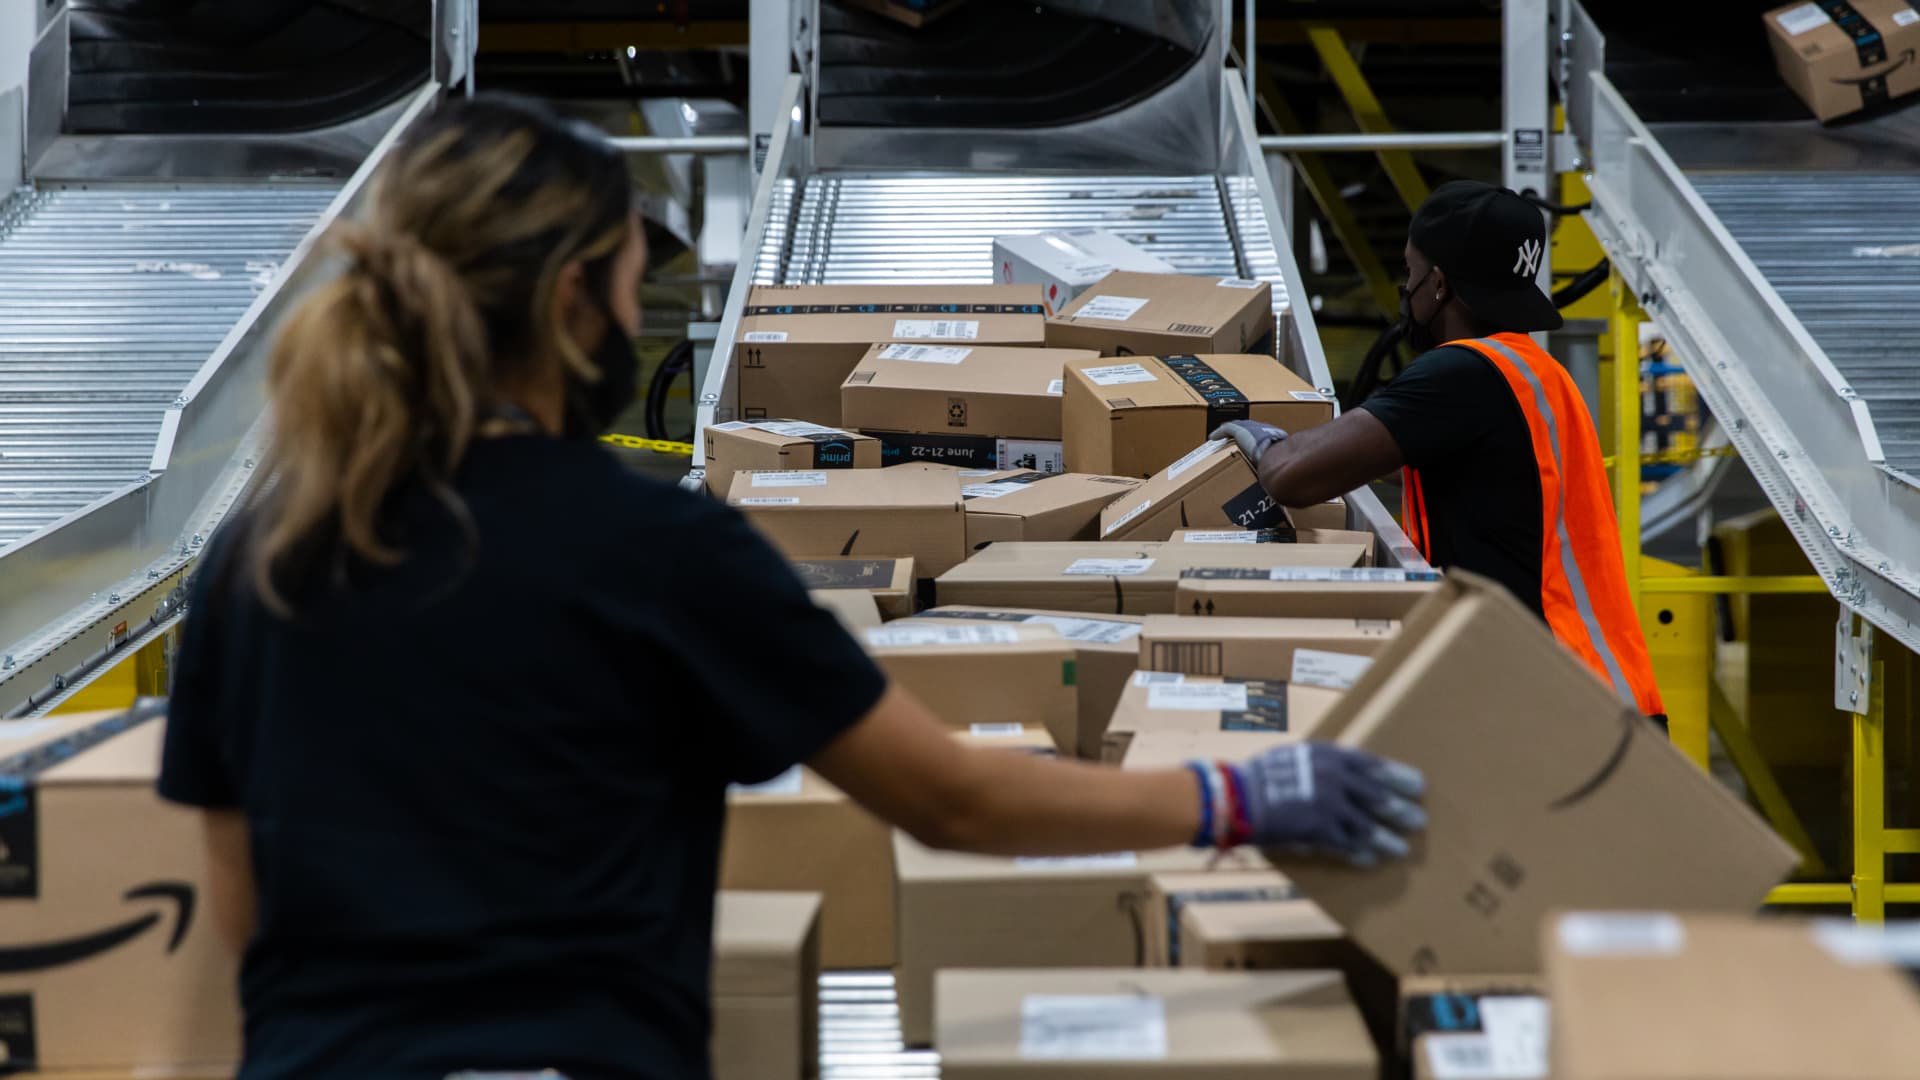 Amazon’s second Prime Day sale will take place Oct. 11-12